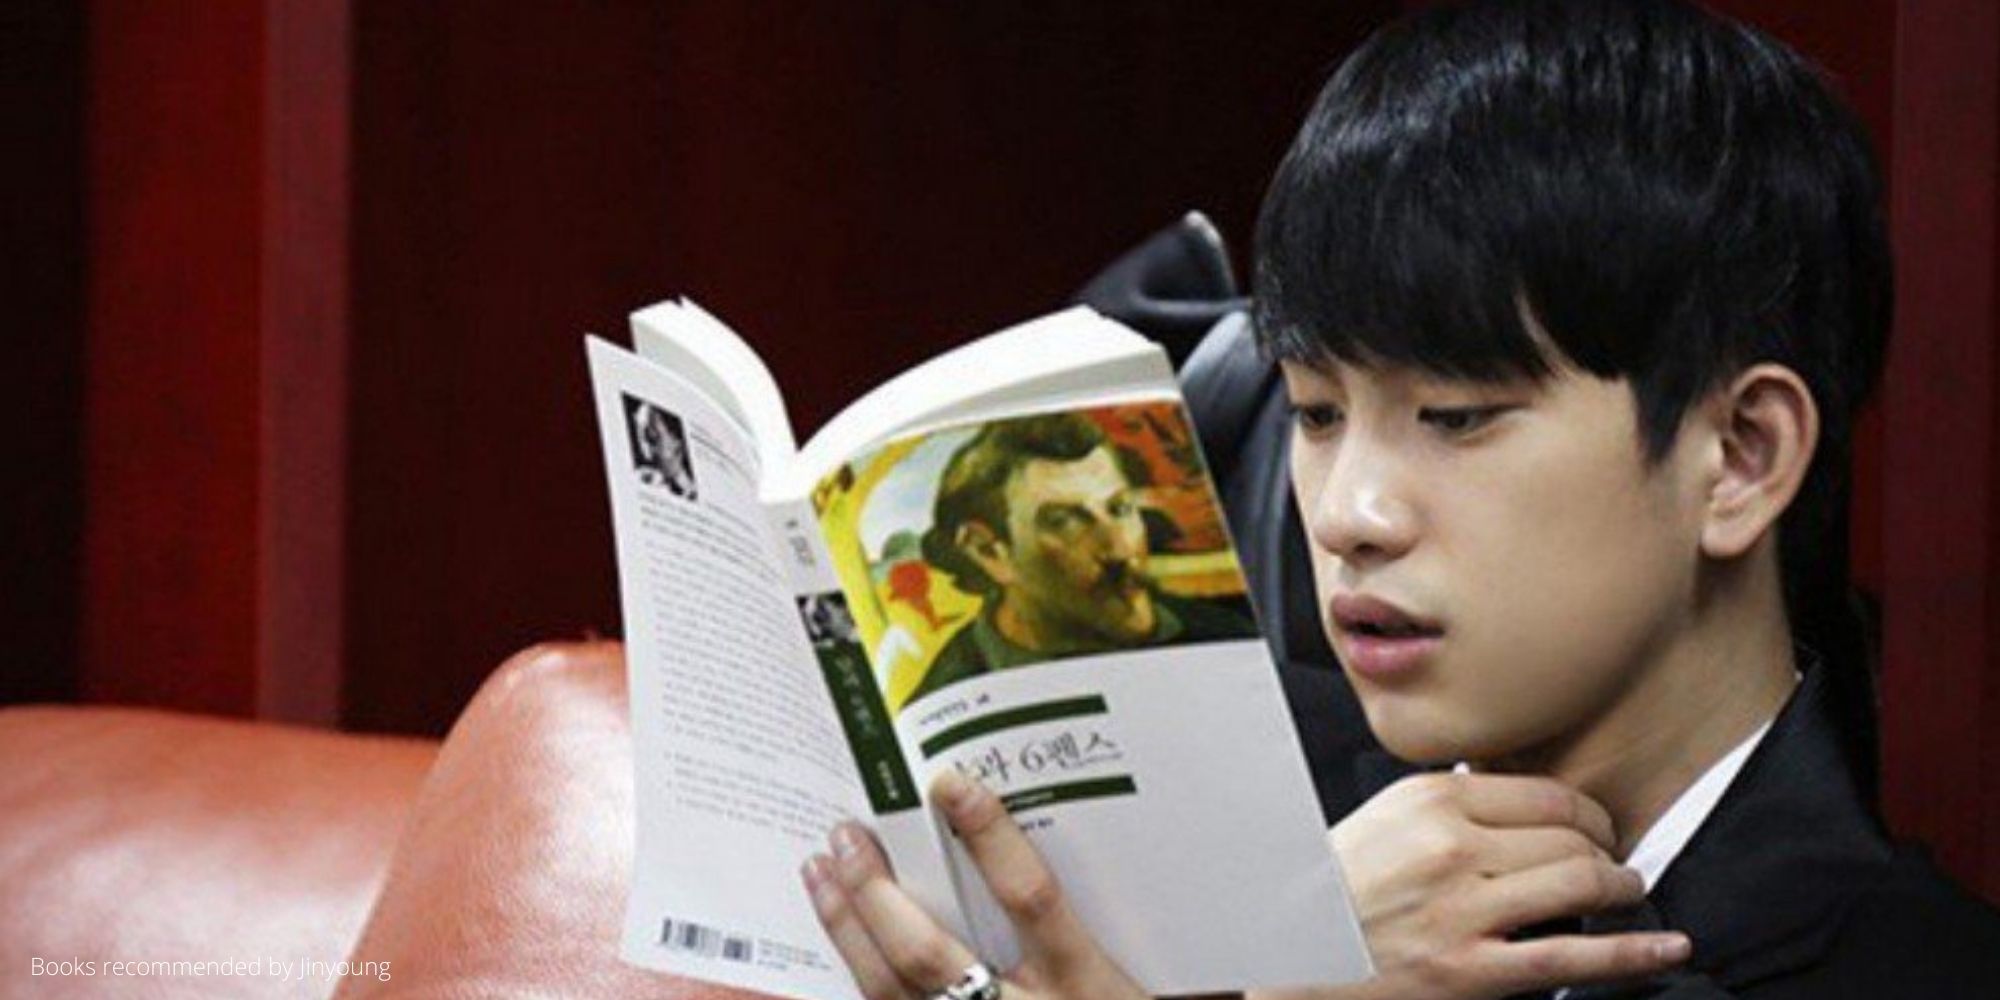 Books recommended by Jinyoung